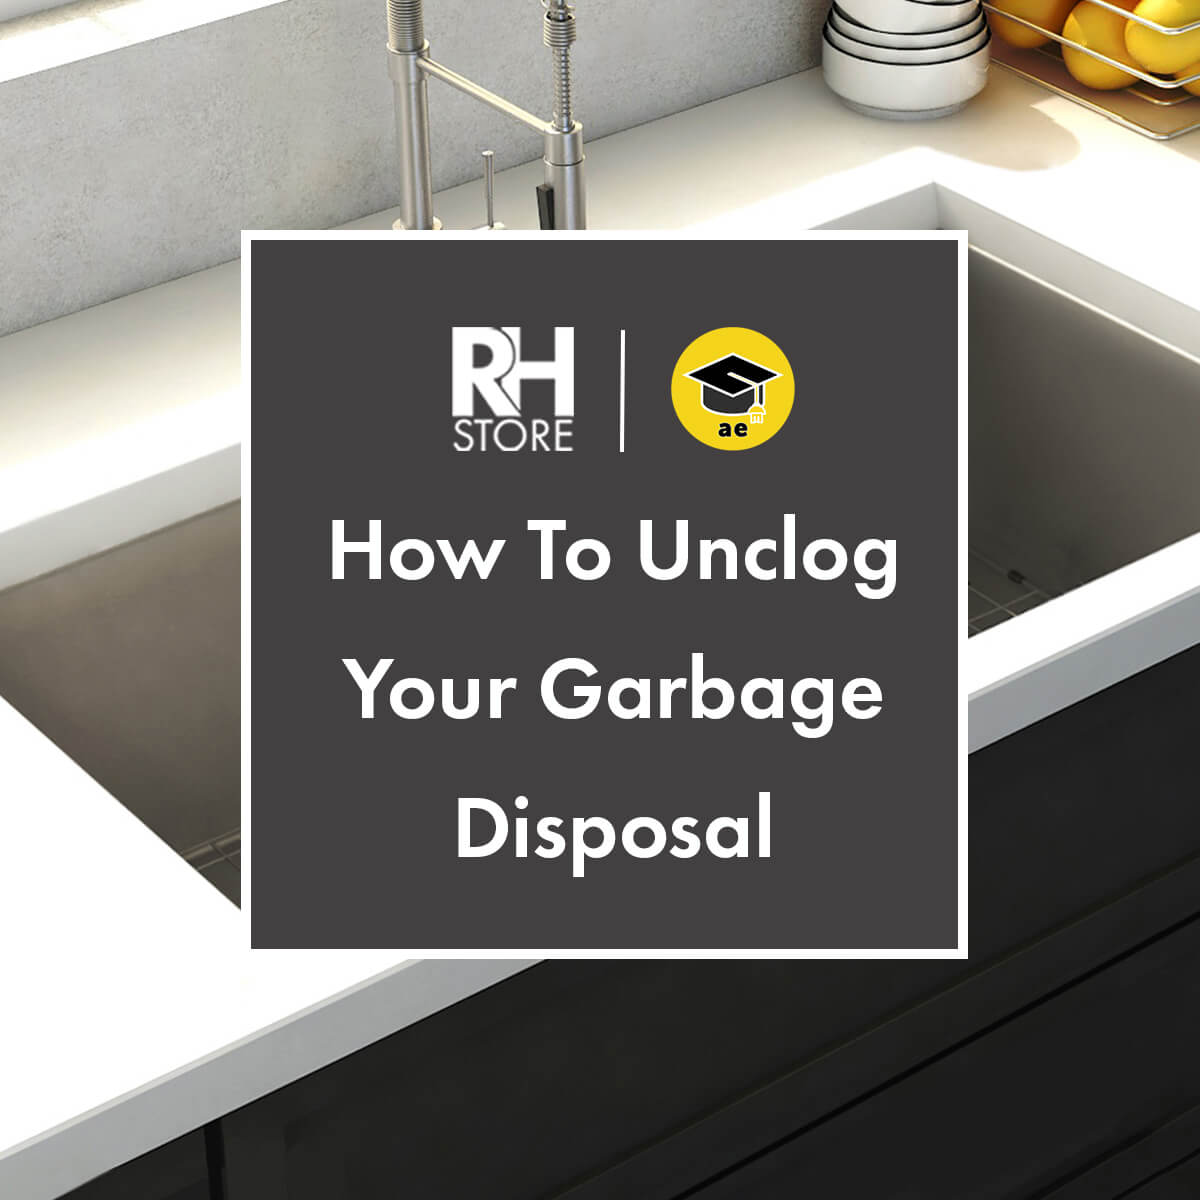 How To Unclog A Garbage Disposal - DIY With Appliance Educator